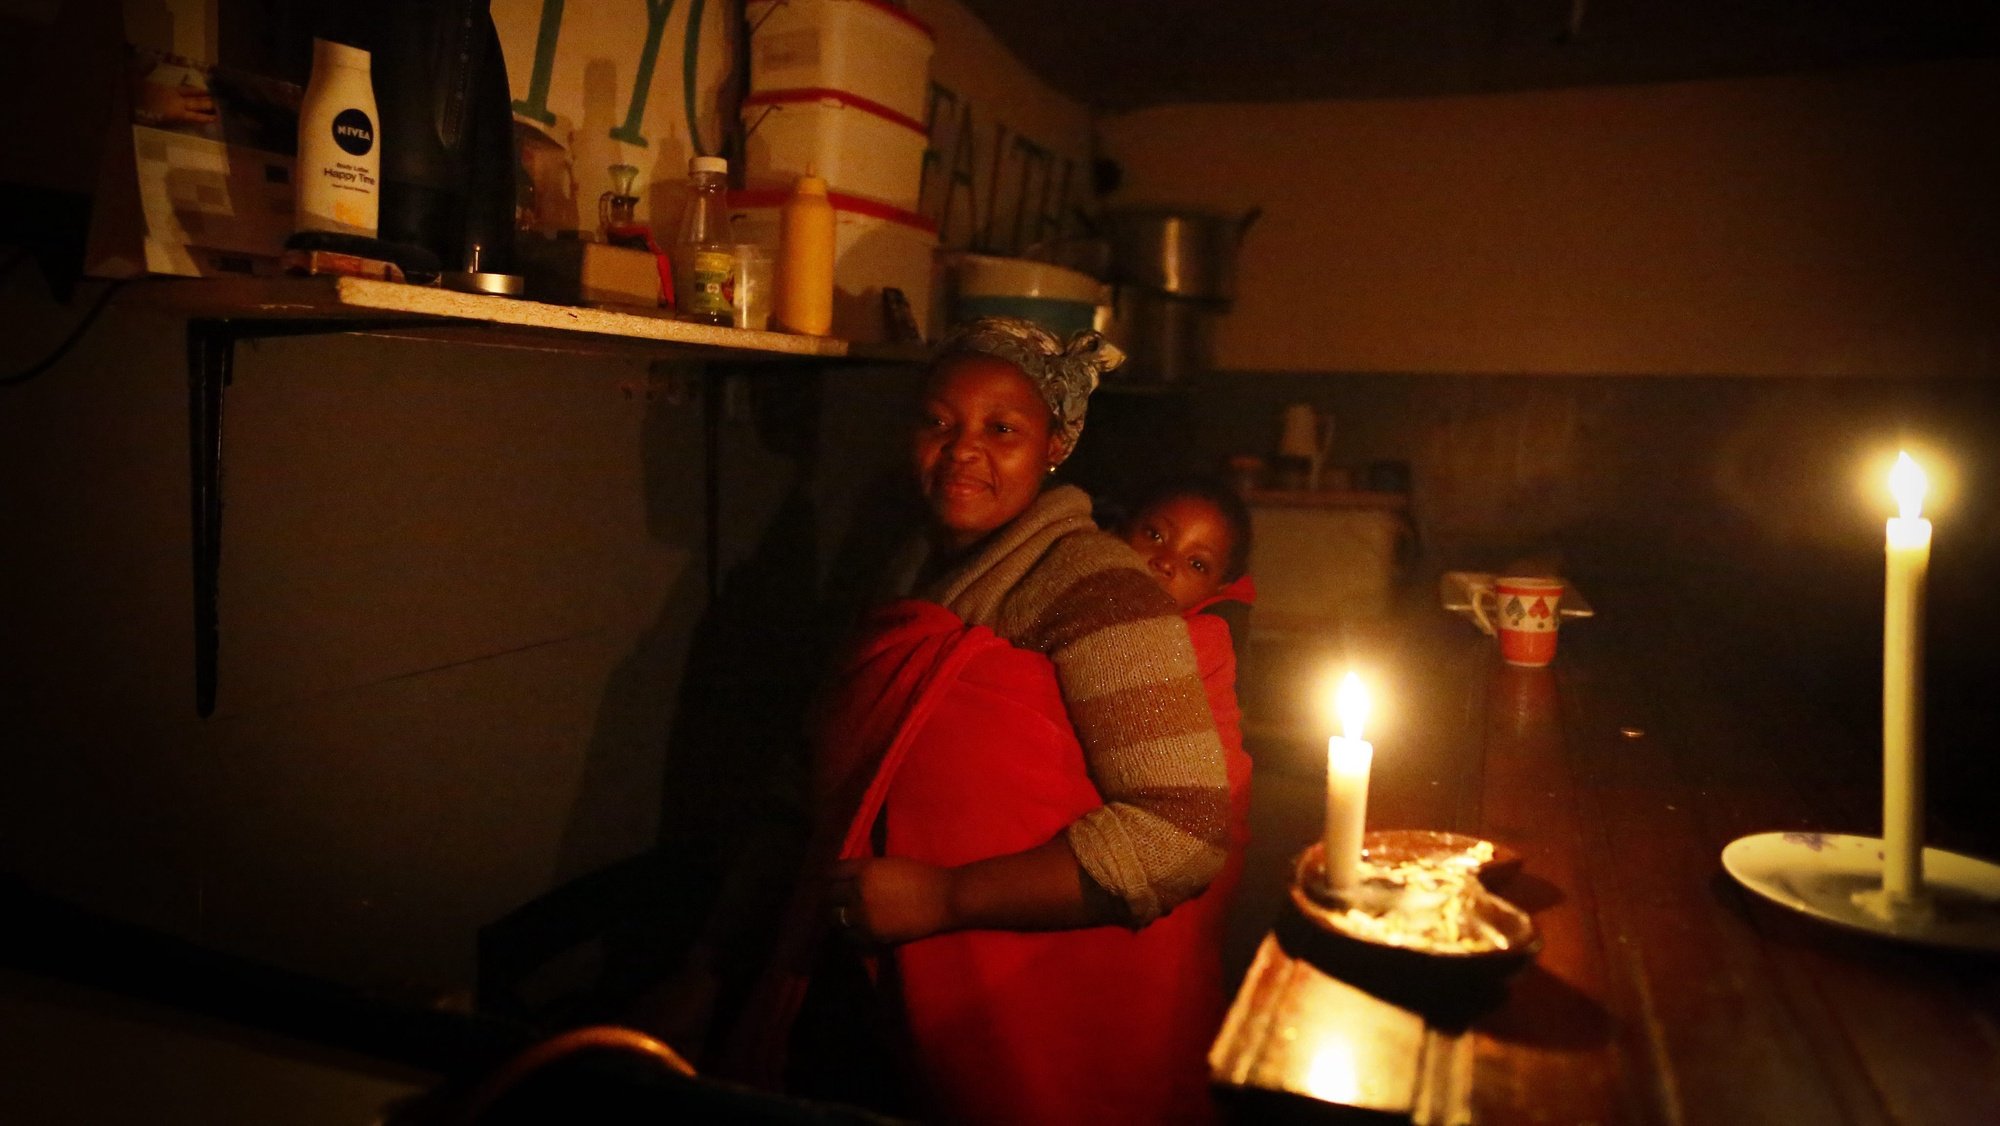 epa04769428 A South African woman carrying her daughter on her back runs her take away restaurant by candle light during a sheduled power outage known as load shedding in the impoverished neighbourhood of Masiphumelele, Cape Town, South Africa 26 May 2015. Large scale industries as well as small businesses are feeling the pinch of South Africa&#039;s beleaguered state run power utility, Eskom. Eskoms inability to meet electricity demand has resulted in a tortuous schedule of rolling blackouts known as Load Shedding which is having a negative effect on the economy. Load Shedding is expected to last several years until the poorly maintained power plants can return to full capacity and the new power plants are completed before proper service can resume to the country.  EPA/NIC BOTHMA